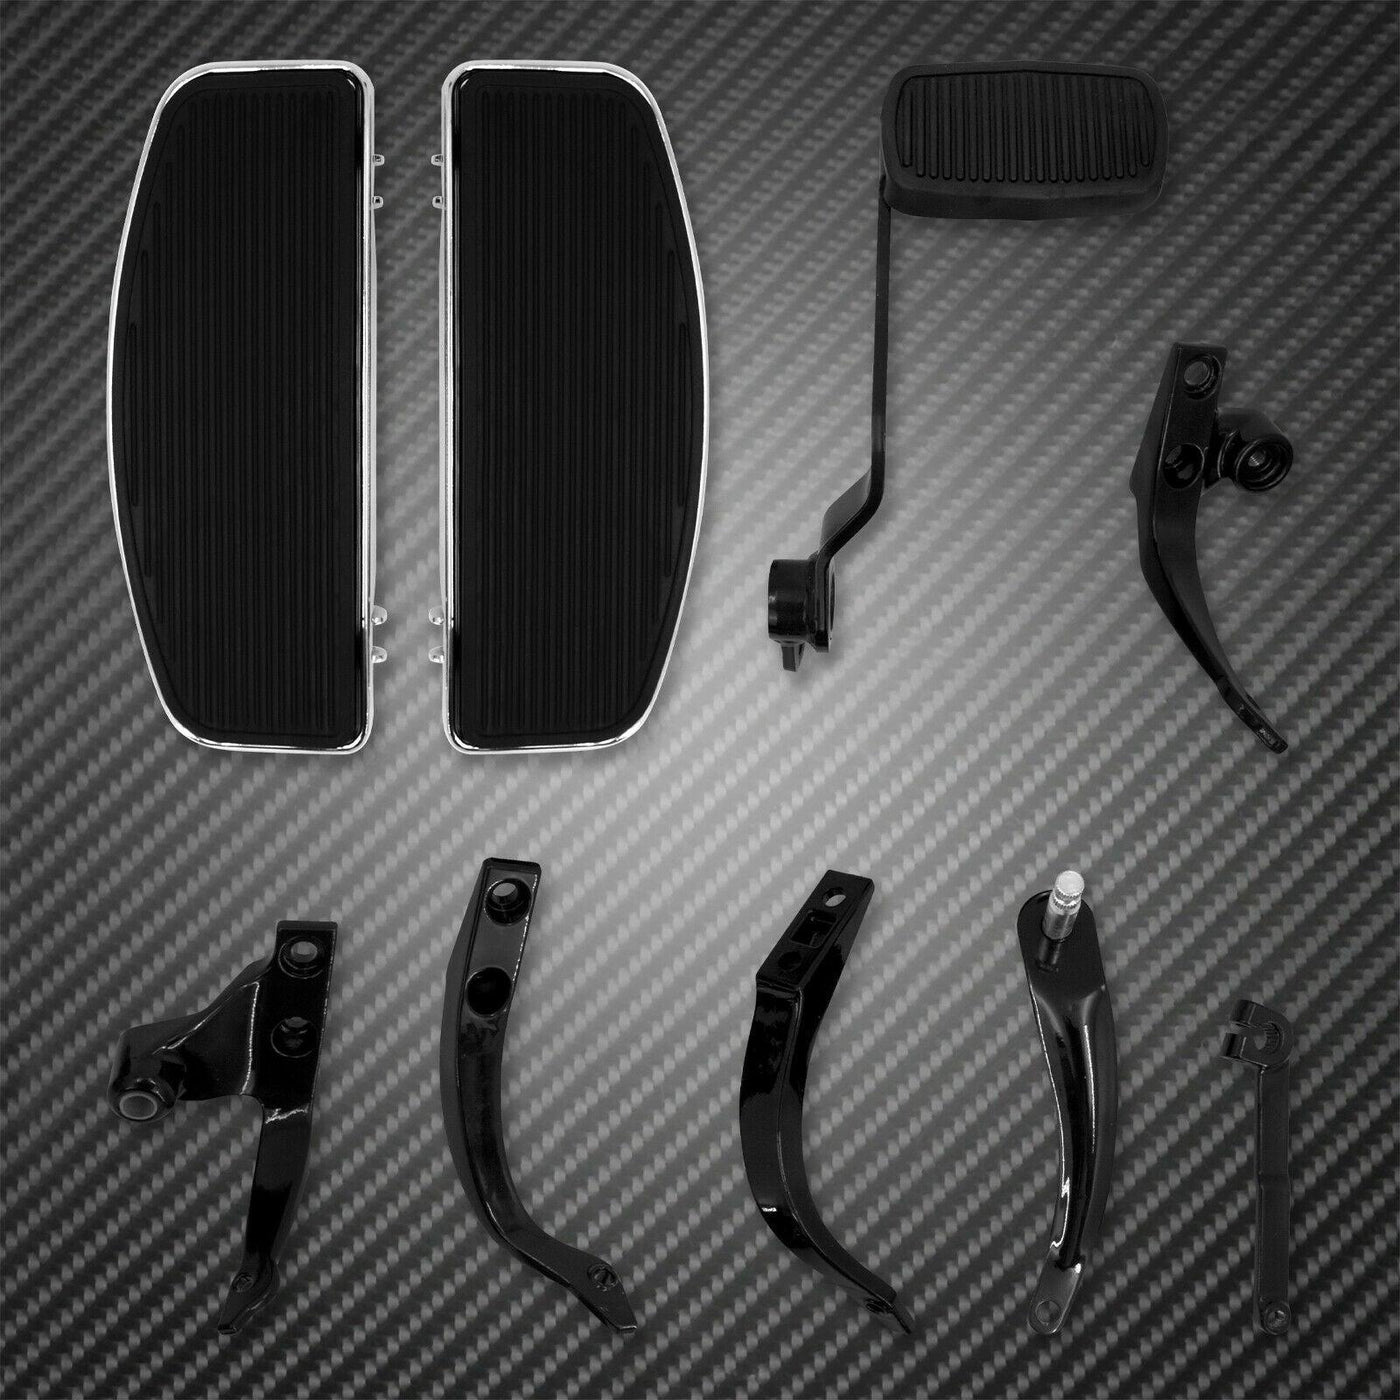 Forward control set Rider Footboard Kit Fit For Harley Dyna FXD FXDB FXDC 06-17 - Moto Life Products